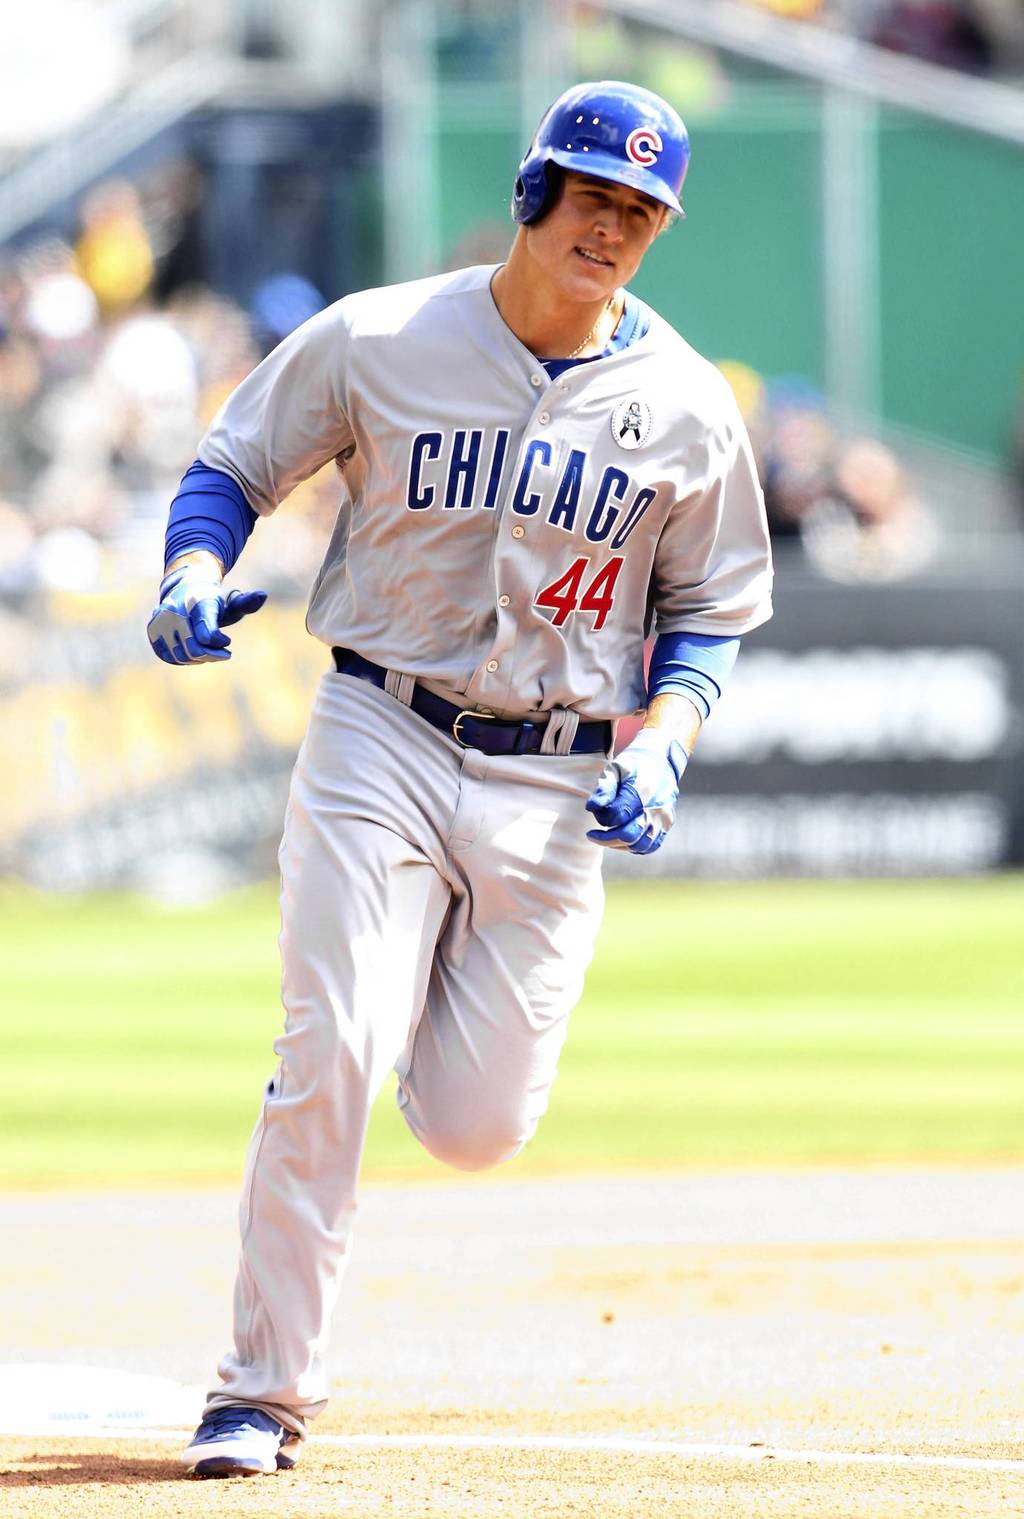 Anthony Rizzo Wallpaper - Anthony Rizzo Wallpaper Iphone , HD Wallpaper & Backgrounds